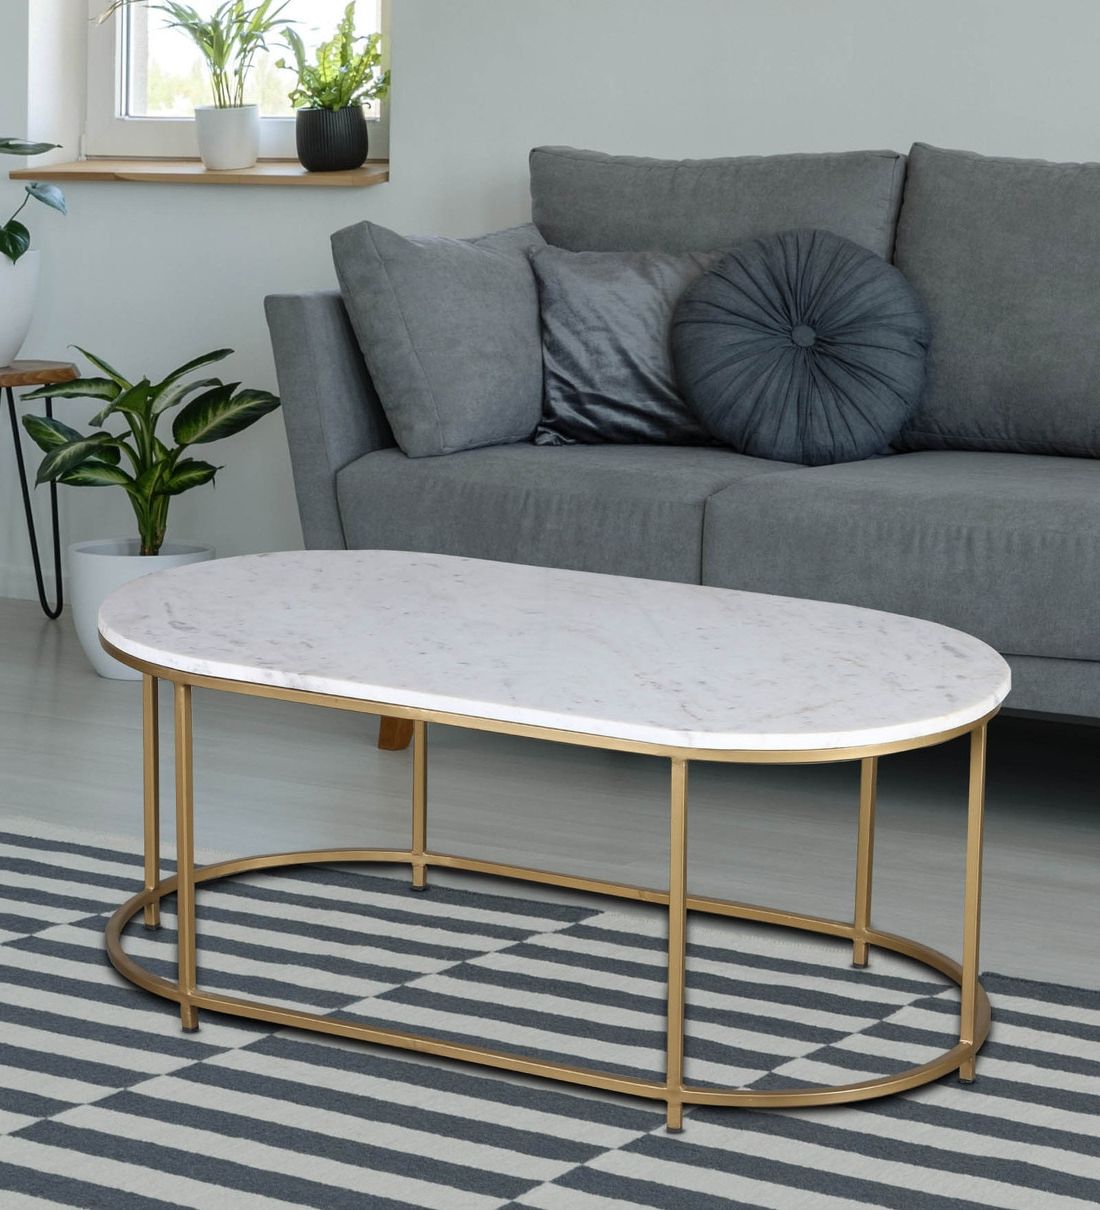 Most Recently Released Marble Coffee Tables Pertaining To Buy Severo Coffee Table With Marble Topfurnitech Online – Oval (View 5 of 10)